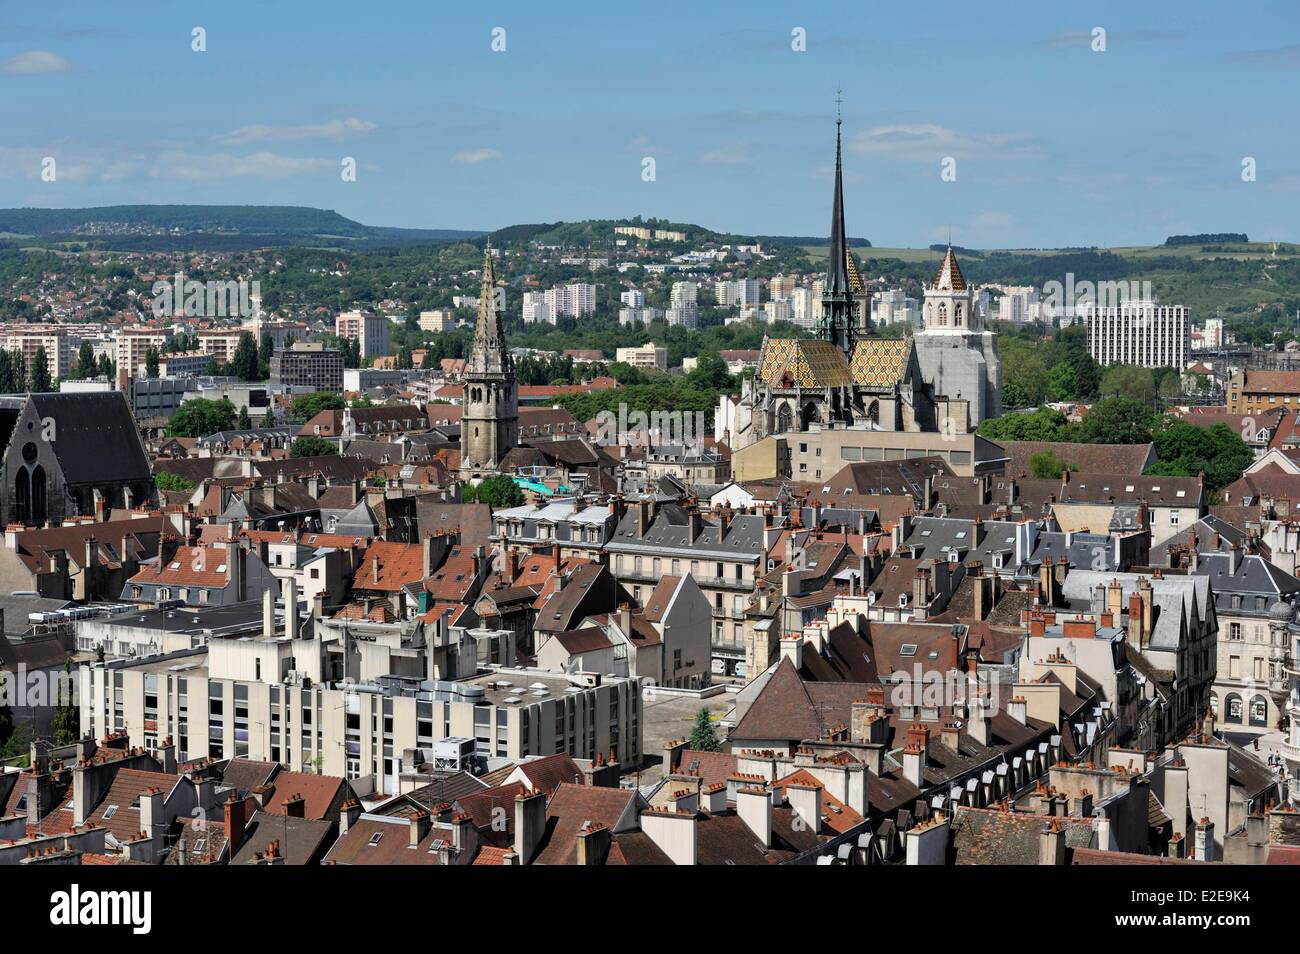 France, Cote d'Or, Dijon, Saint Benign Cathedral and city center seen from the tower Philip the Good Stock Photo